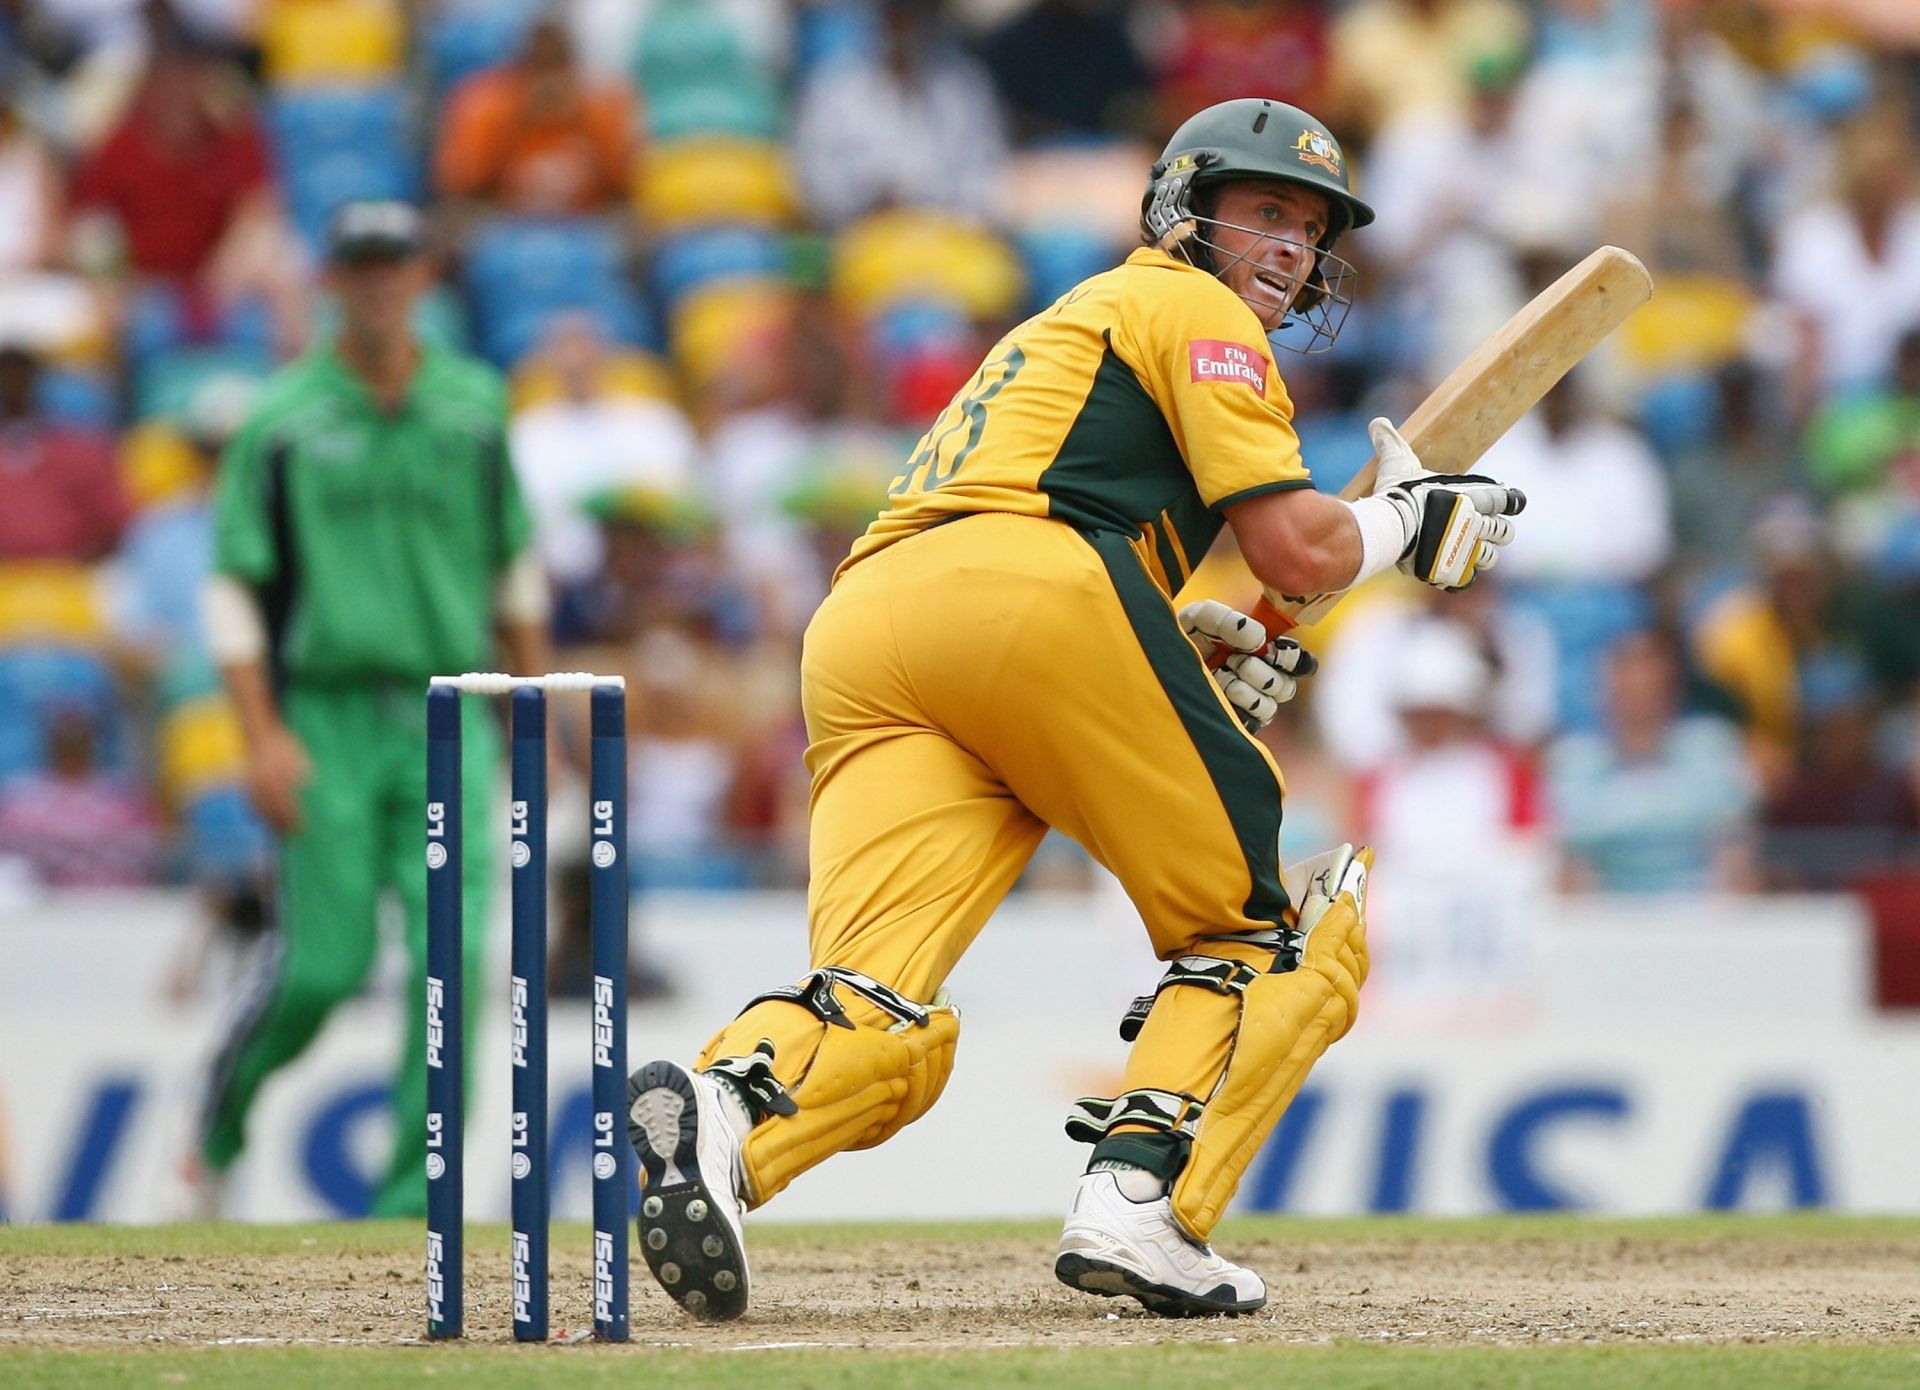 Michael Hussey in action during the 2007 ICC World Cup match between Australia and Ireland in Bridgetown. (Getty Images)